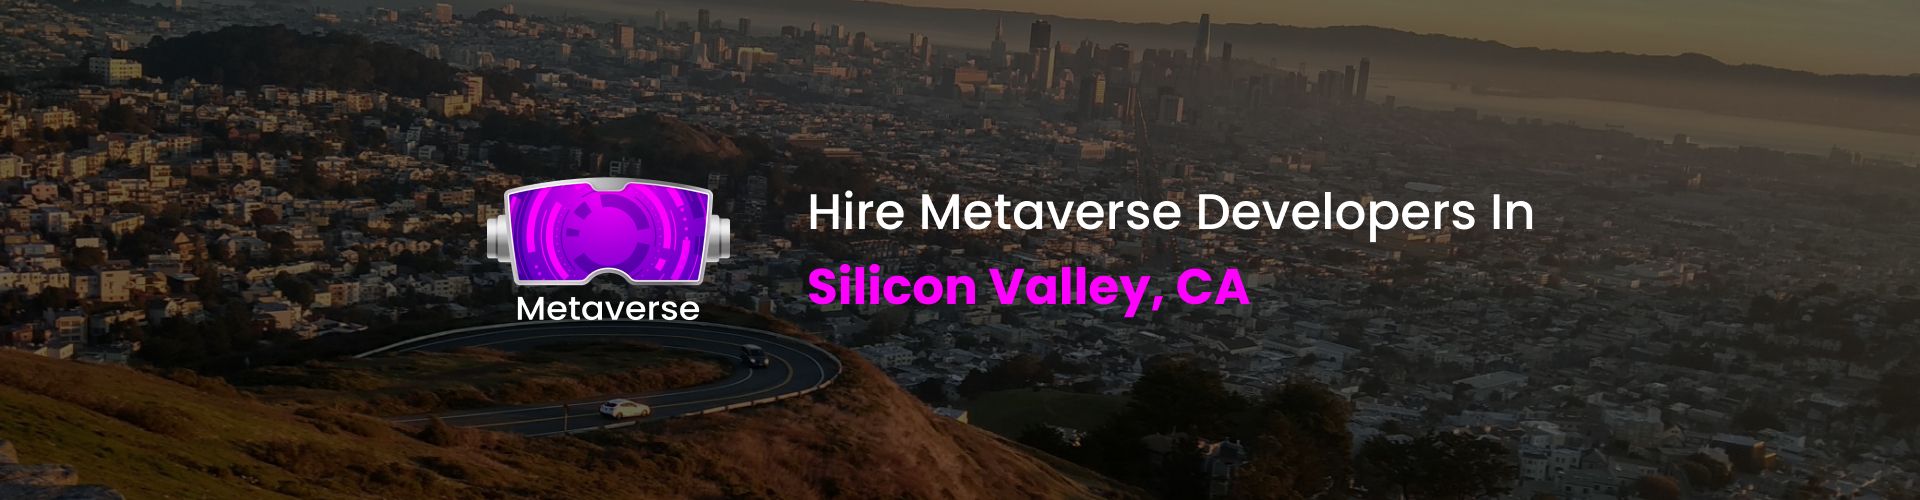 hire metaverse developers in silicon valley, ca